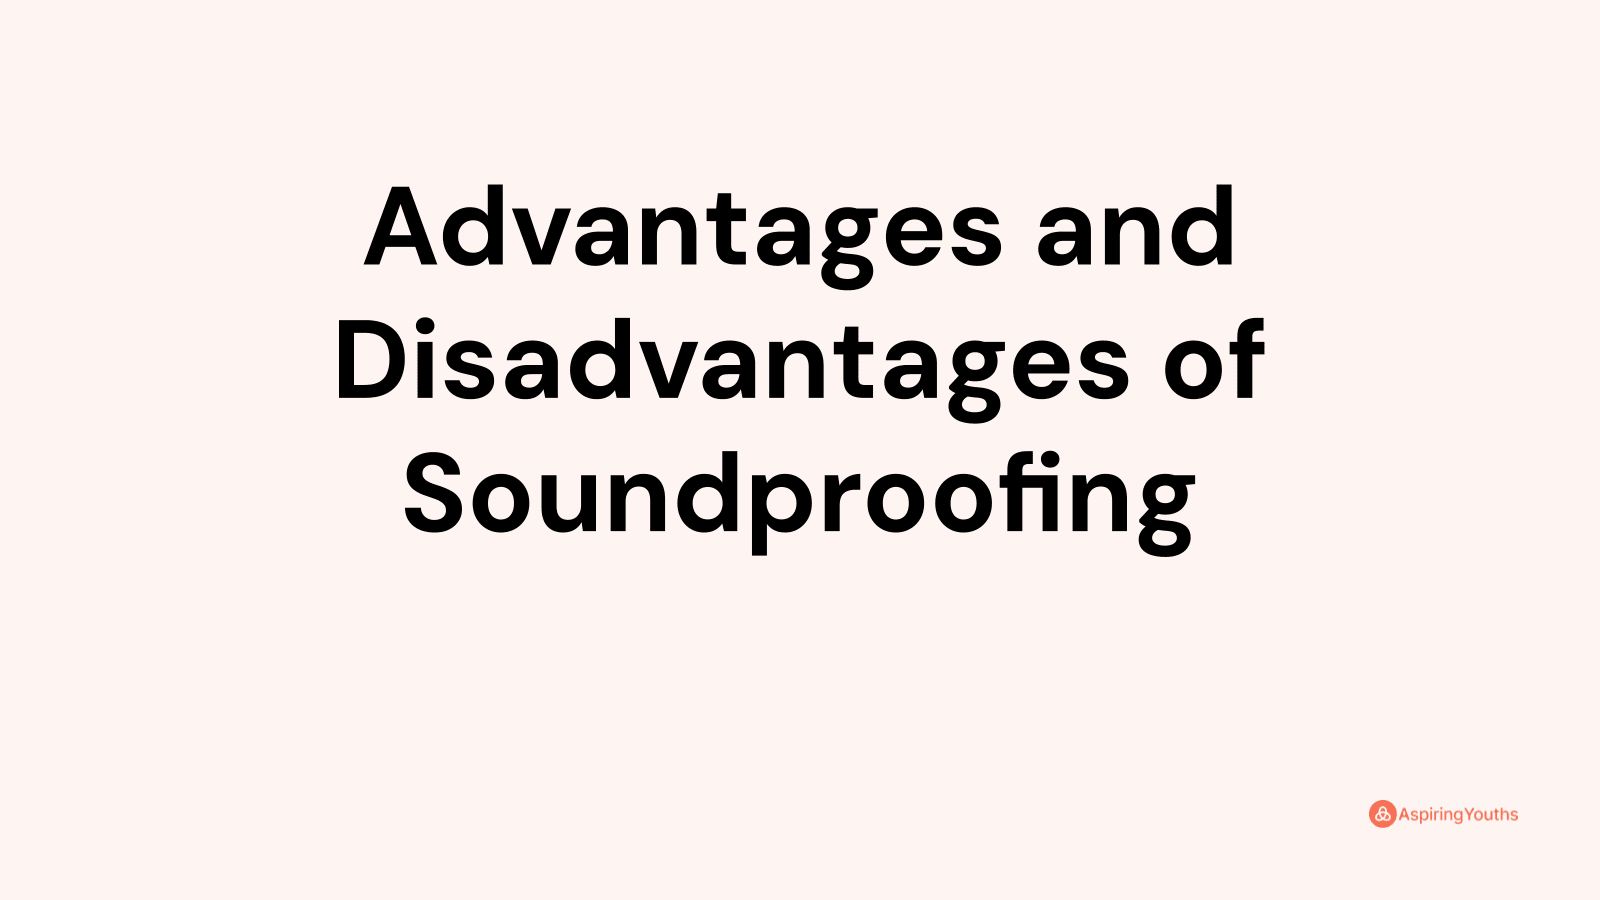 Advantages and disadvantages of Soundproofing